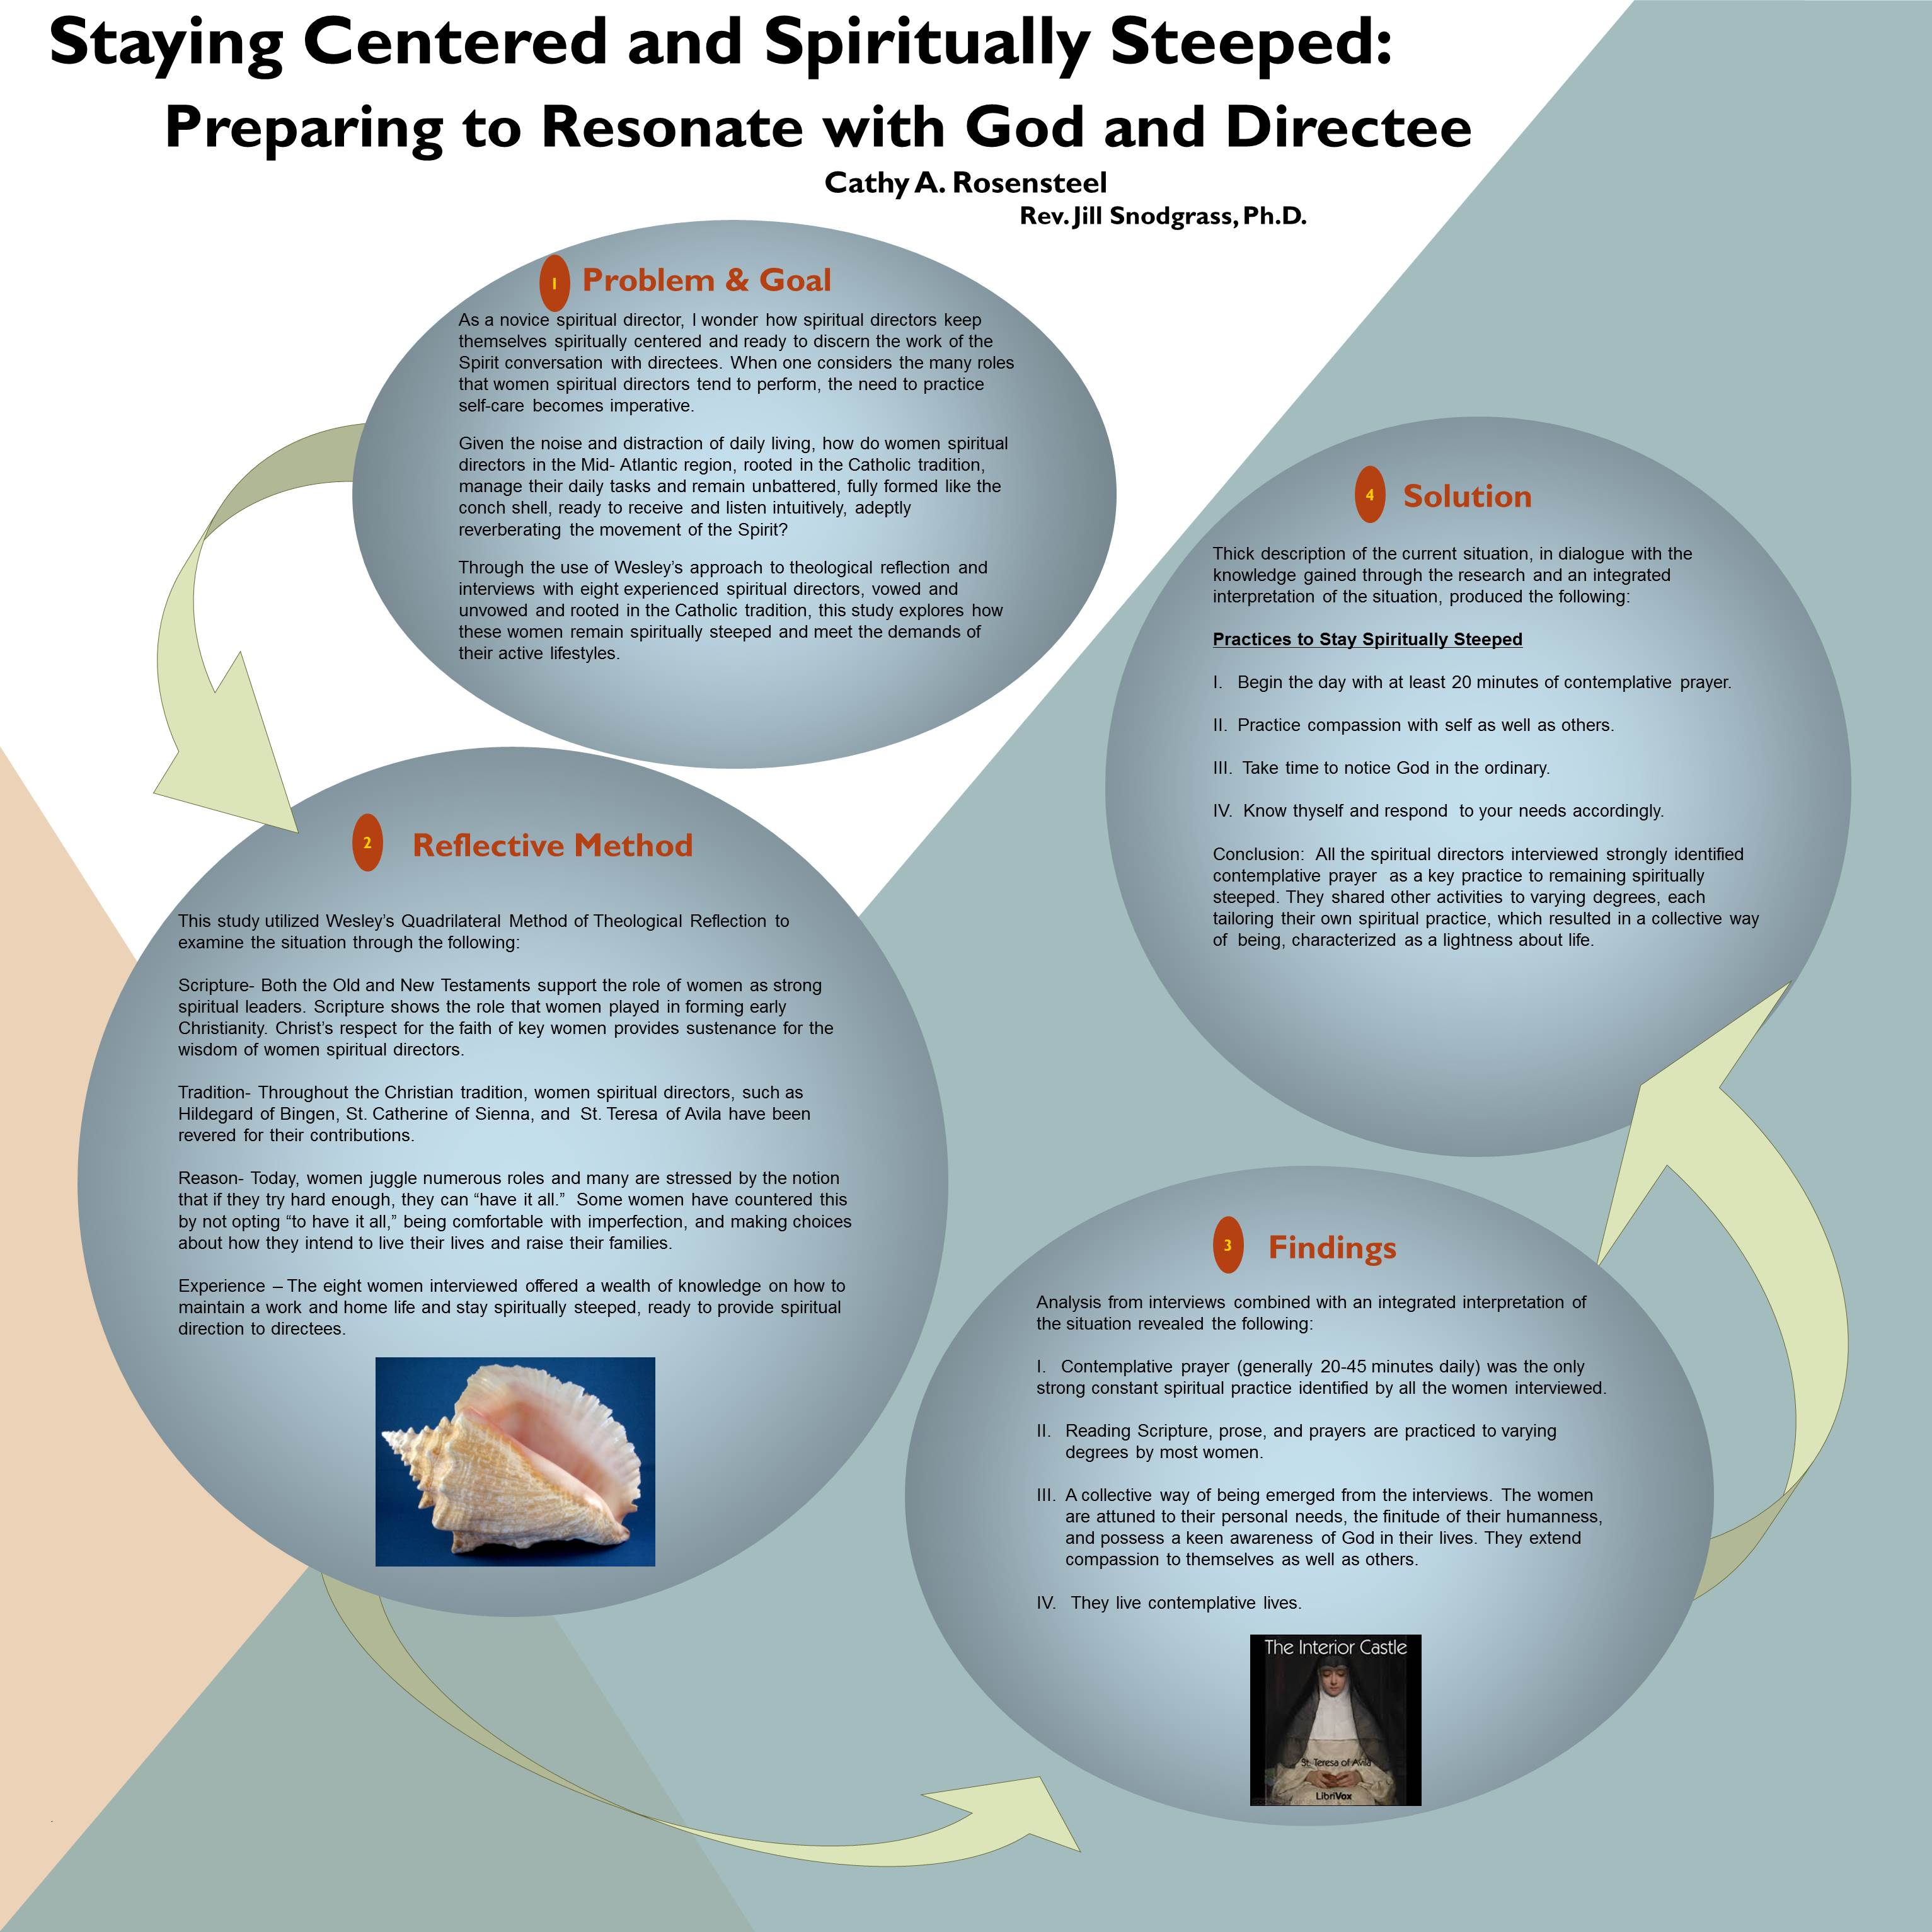 poster image: 'Staying Centered and Spiritually Steeped: Preparing to Resonate with God and Directee'